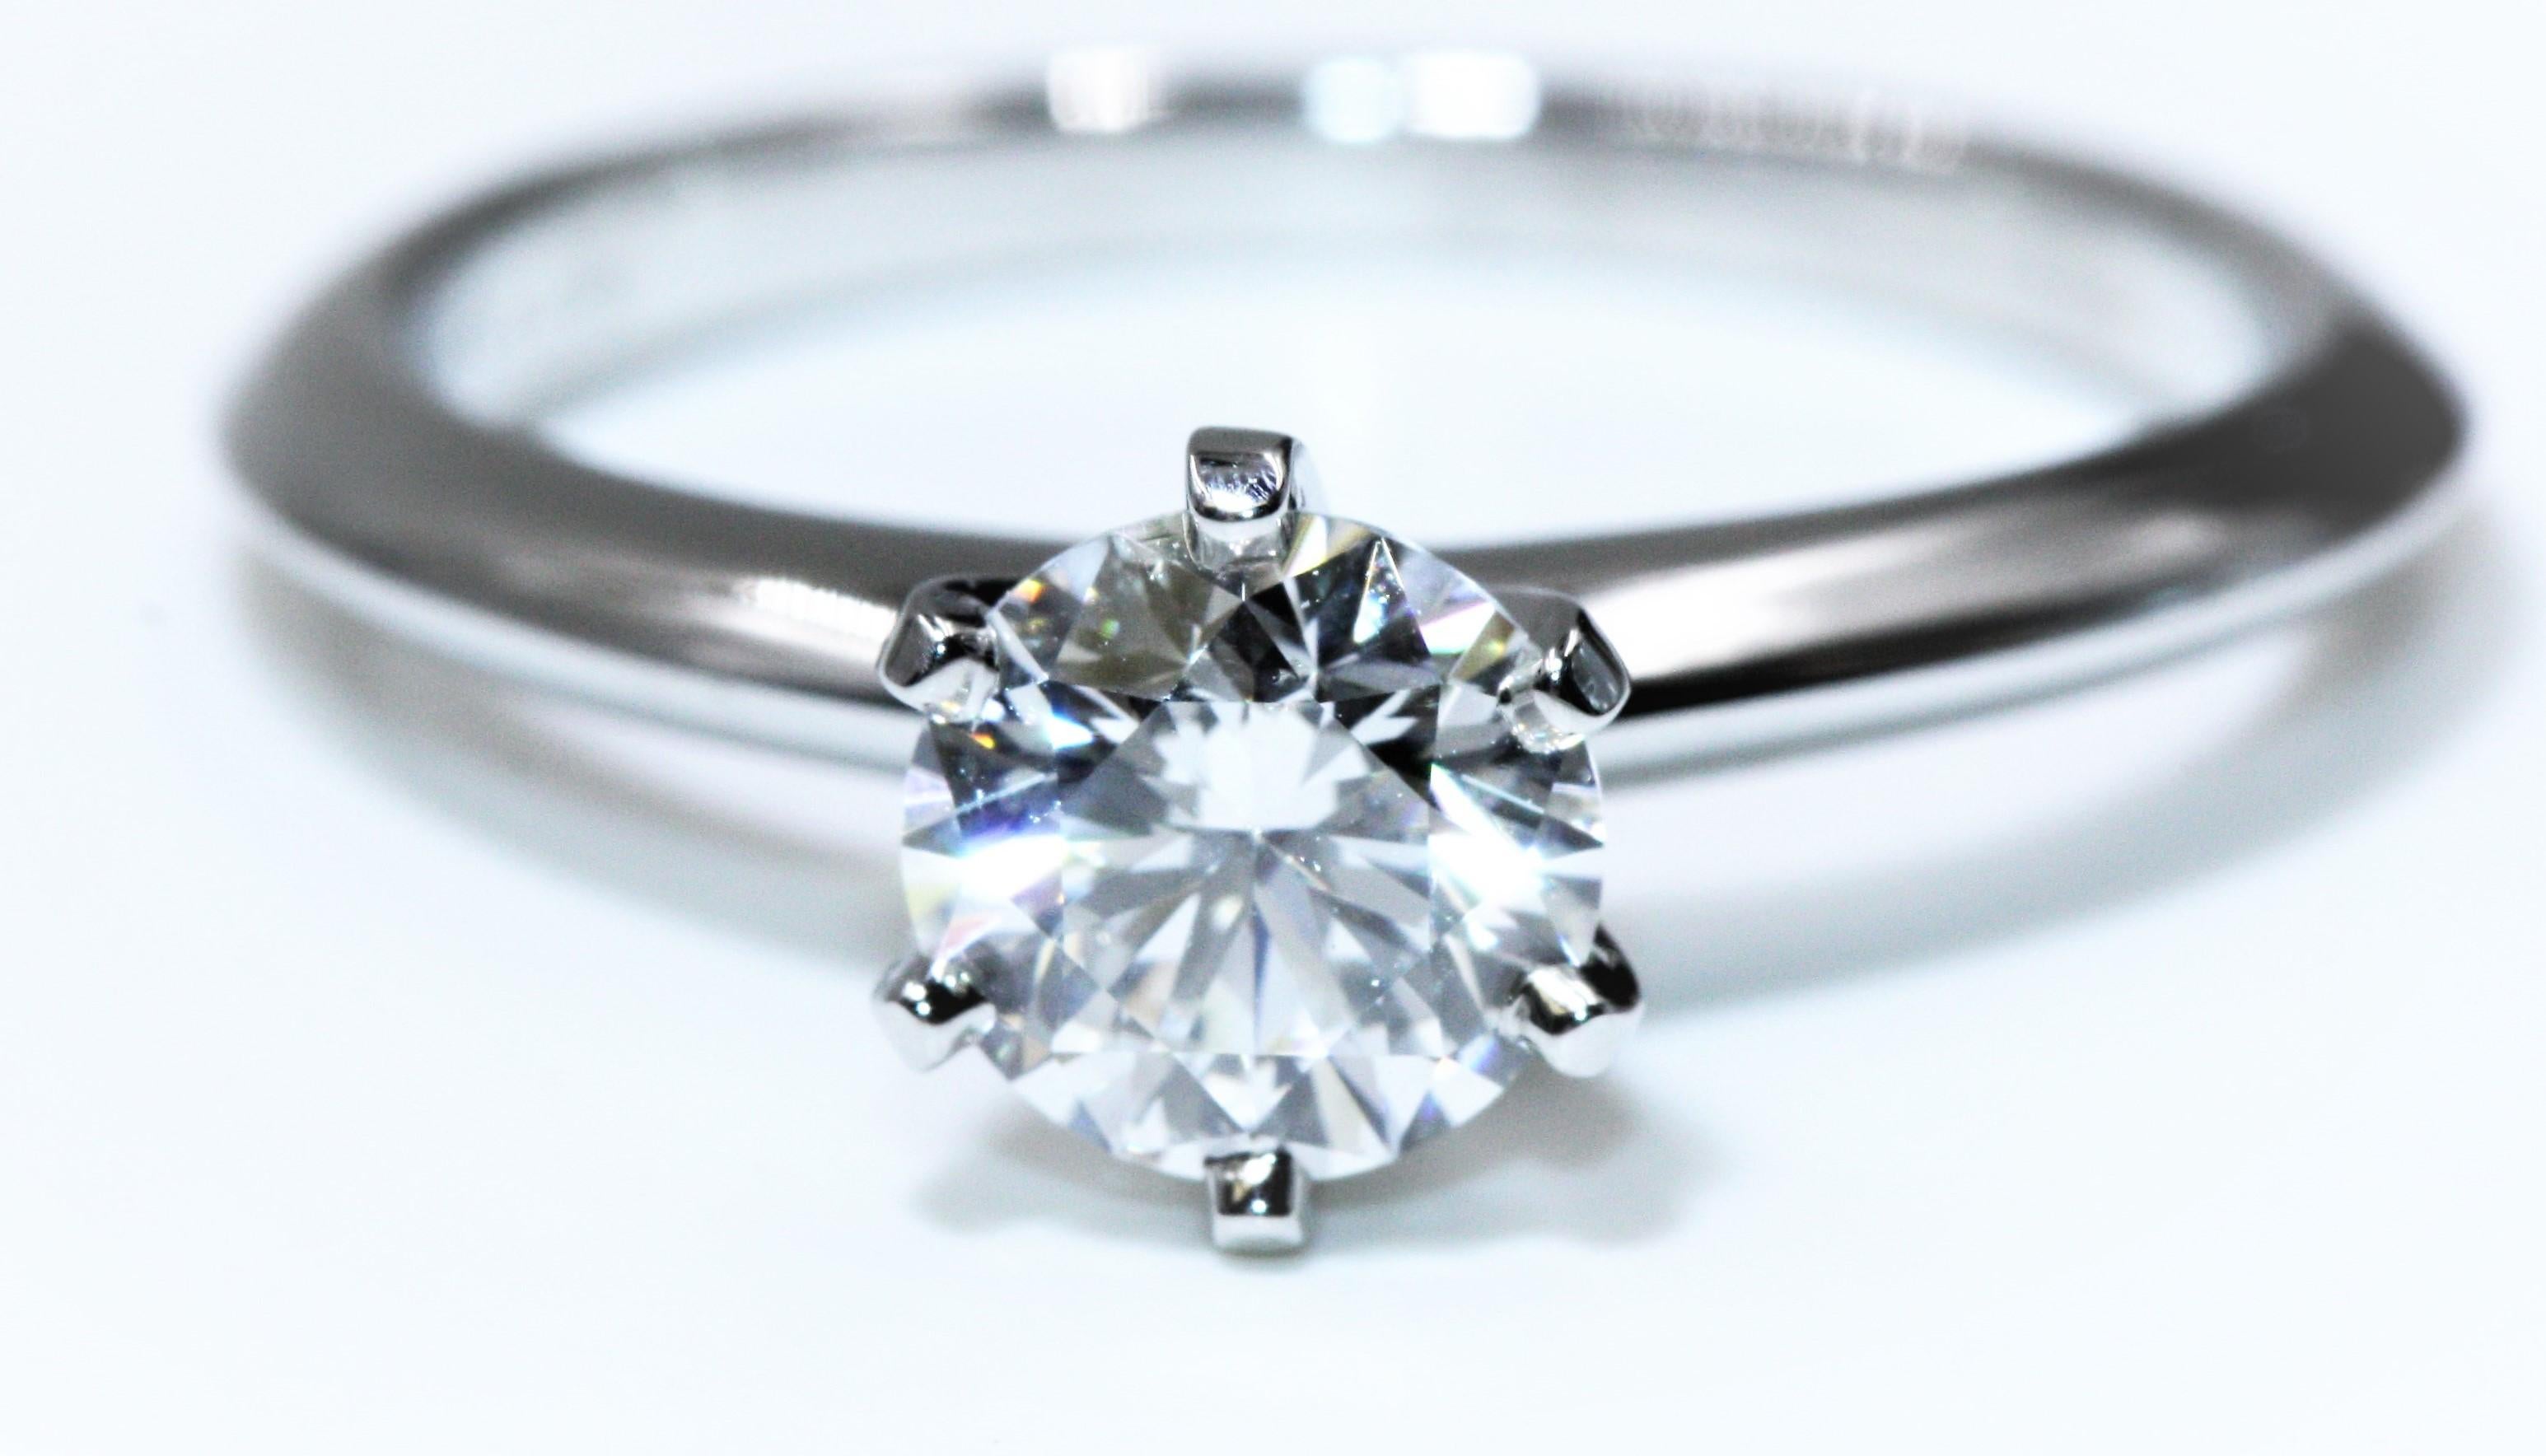 Tiffany & Co. Platinum Diamond Engagement Ring 0.83 Carat, SI1, H In Excellent Condition For Sale In New York, NY